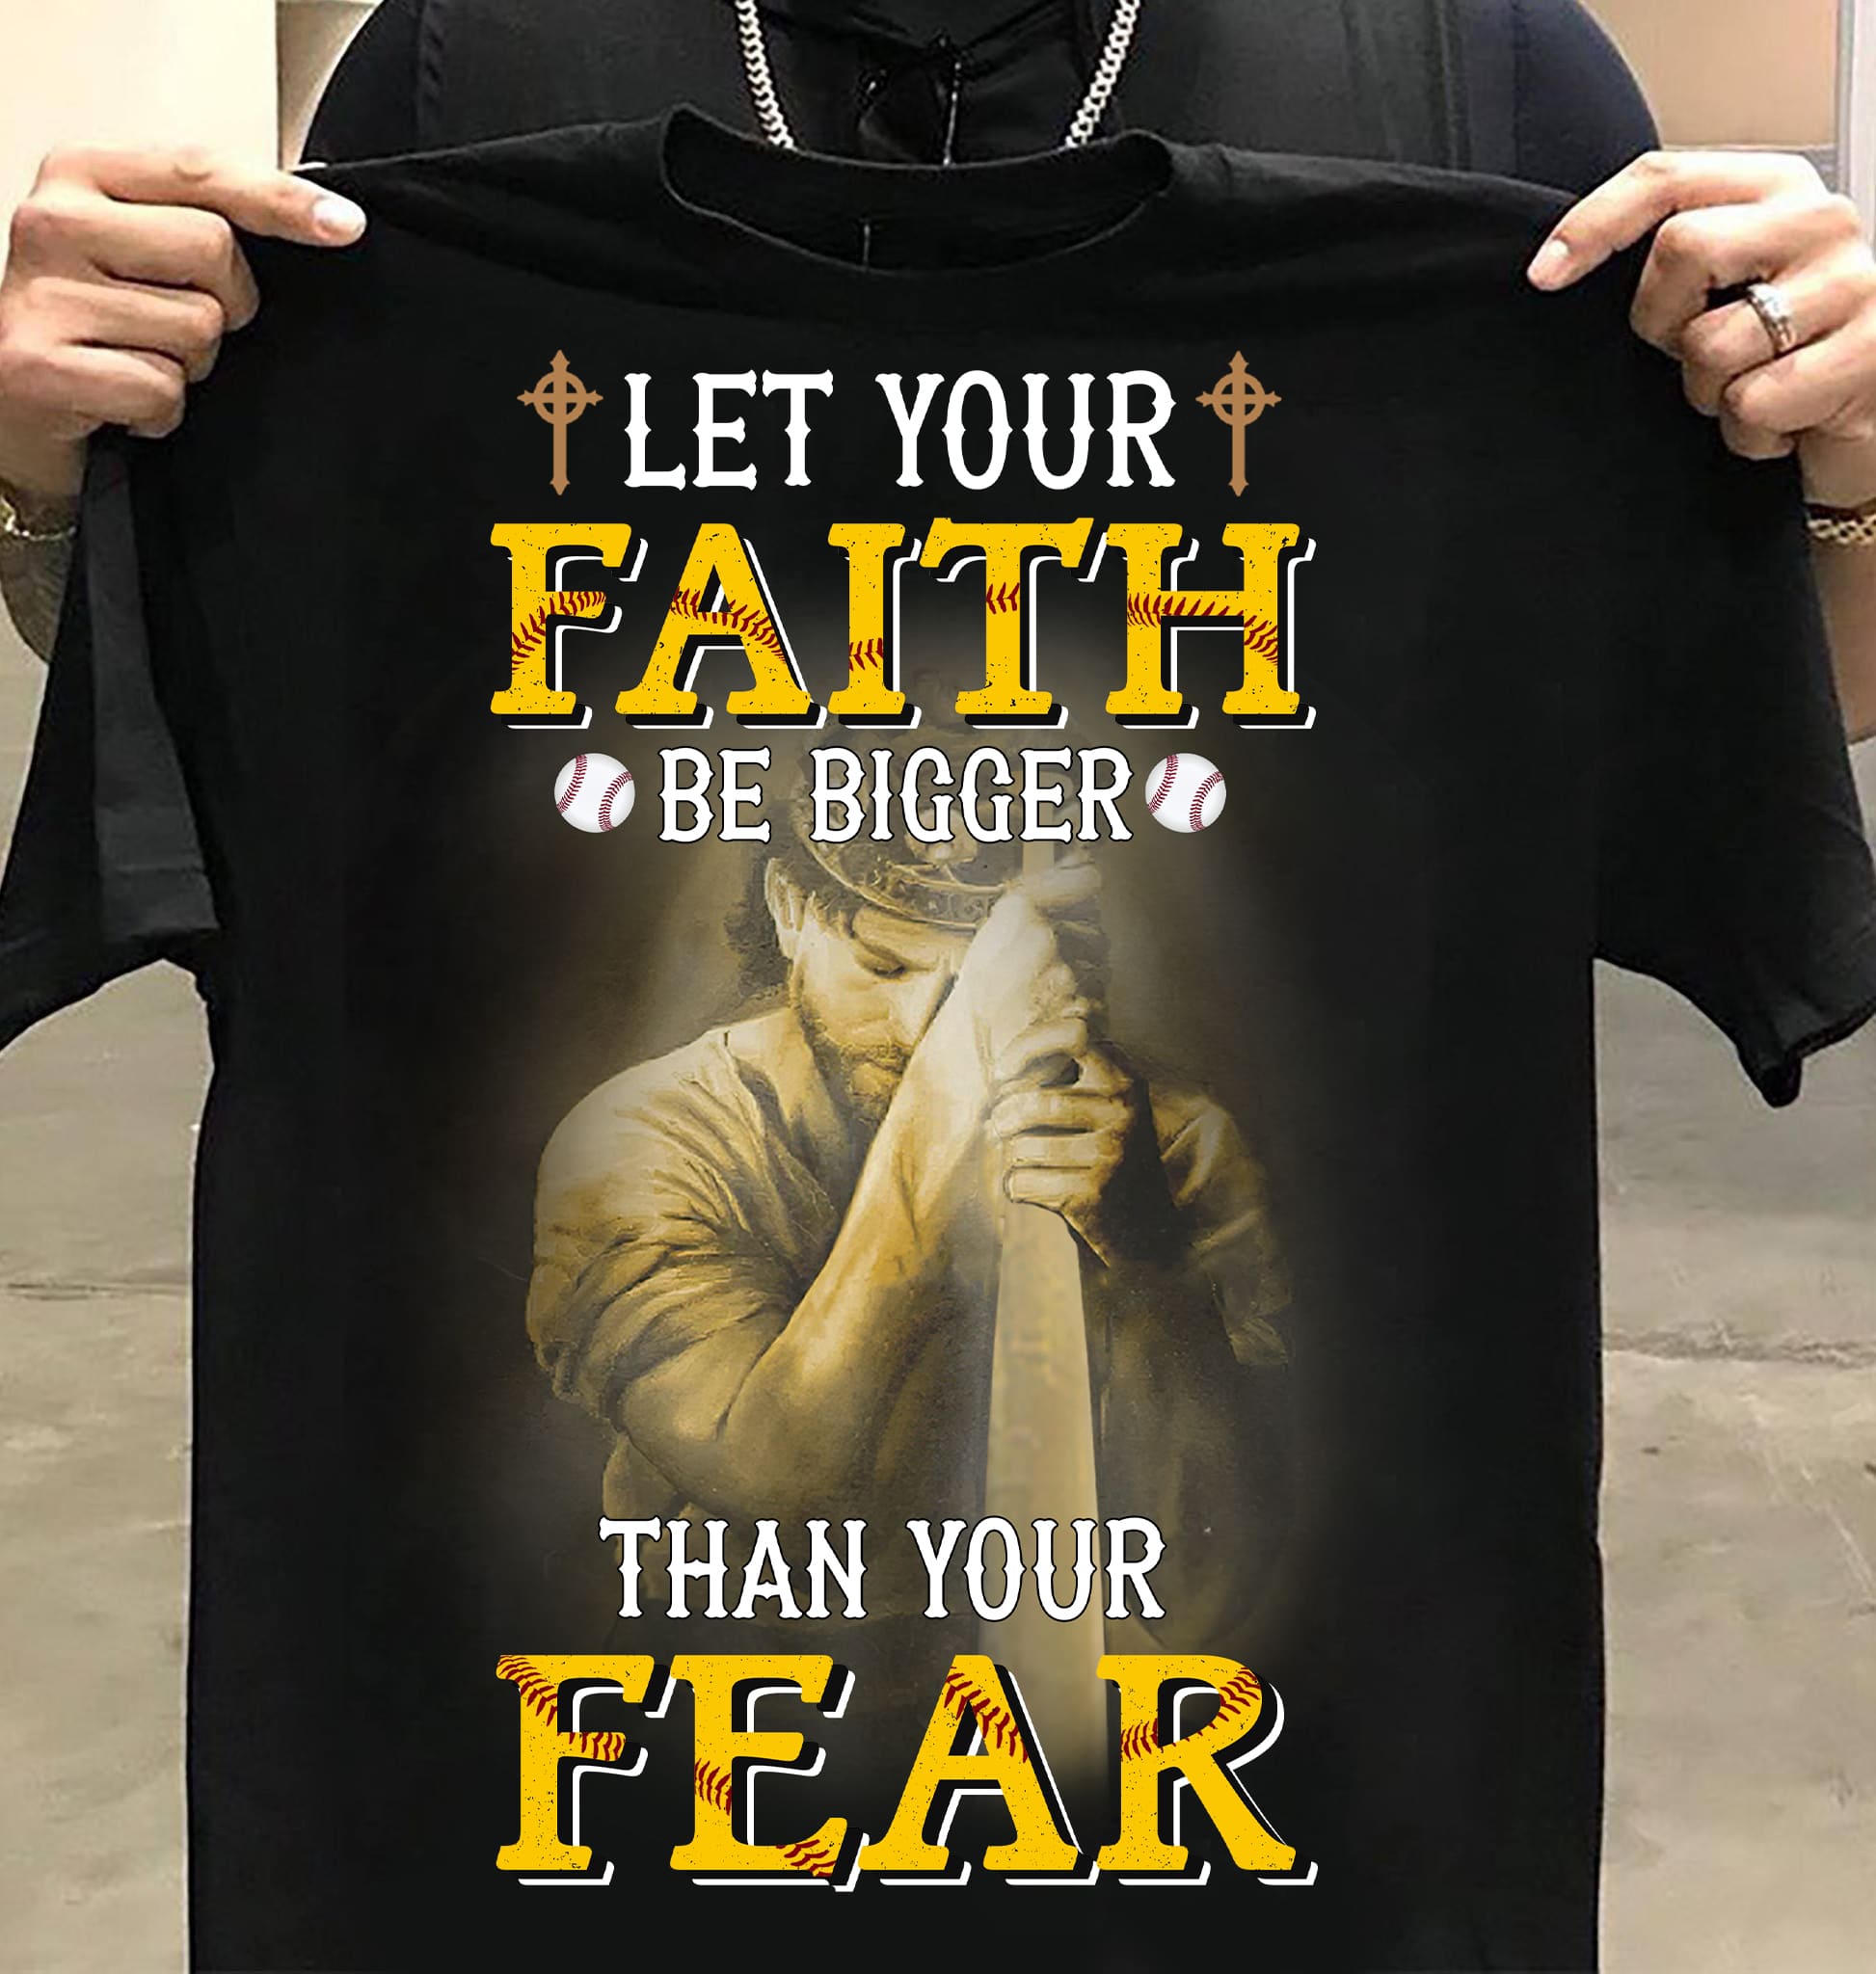 Let your faith be bigger than your fear - God always with you, Believe in Jesus